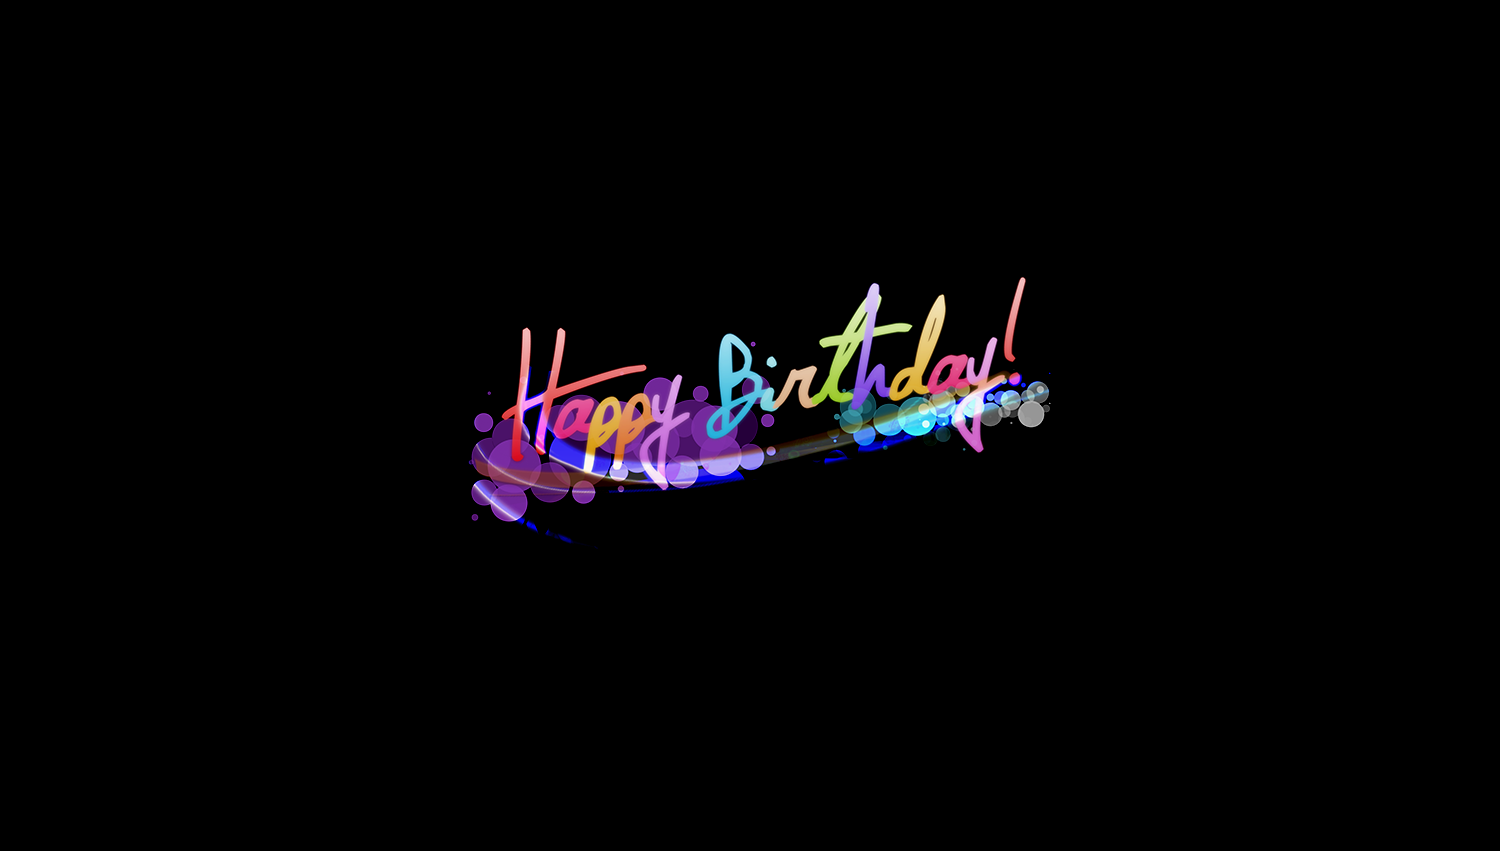 Free Download Happy Birthday Wallpapers Download High Definition 1500x851 For Your Desktop Mobile Tablet Explore 75 Happy Birthday Wallpaper Images Happy Birthday Wallpaper